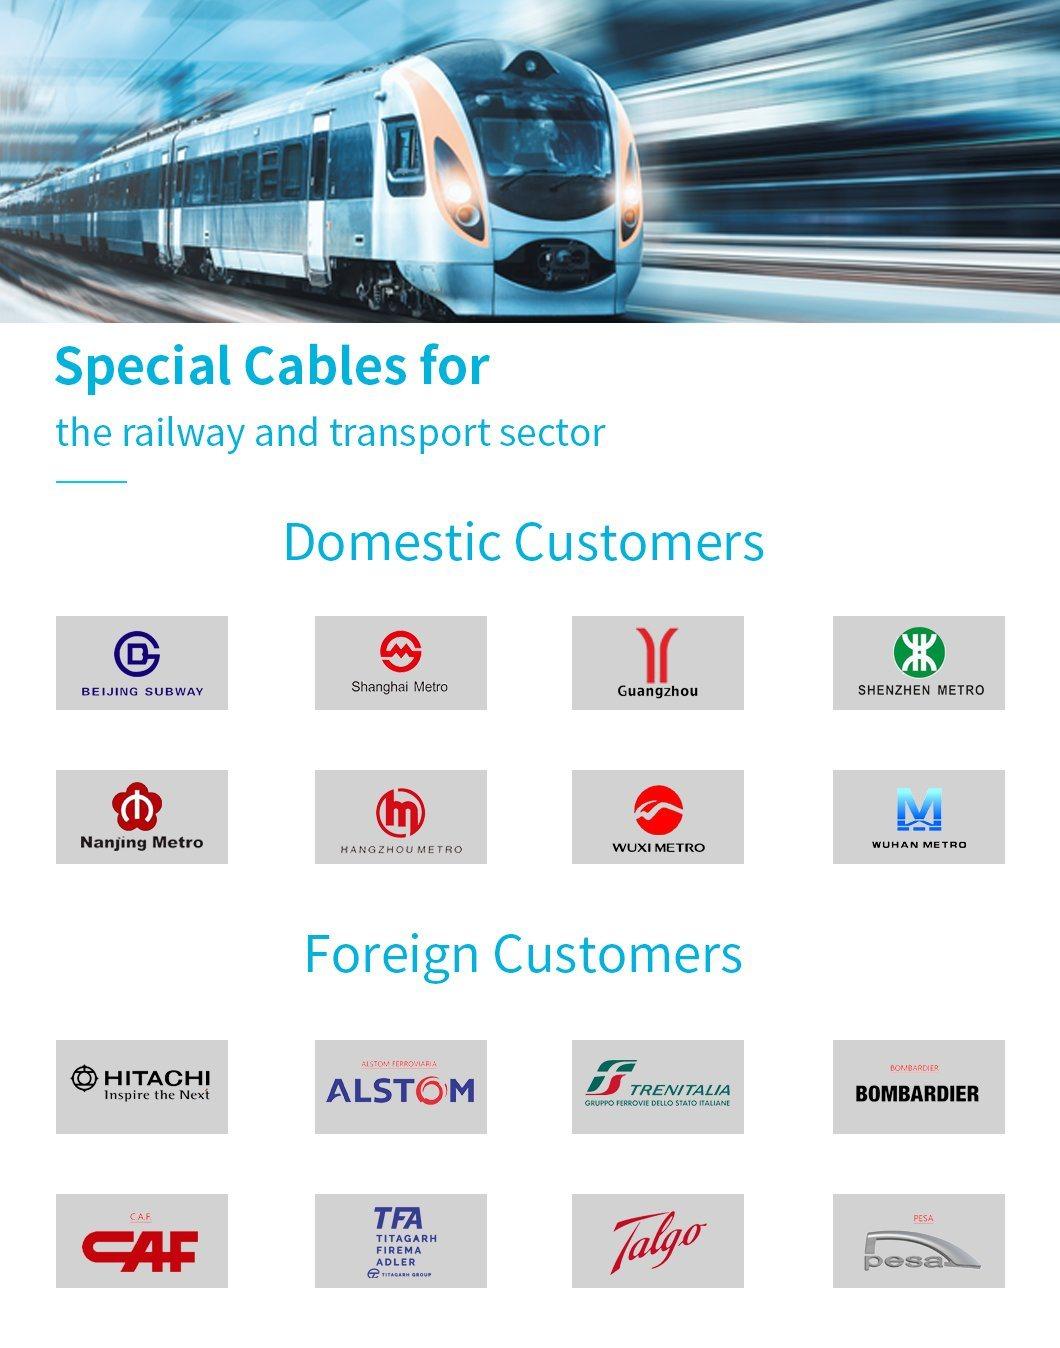 Eco-Friendly Railway Rolling Stock Cable with CE Certification for High-Speed Subway